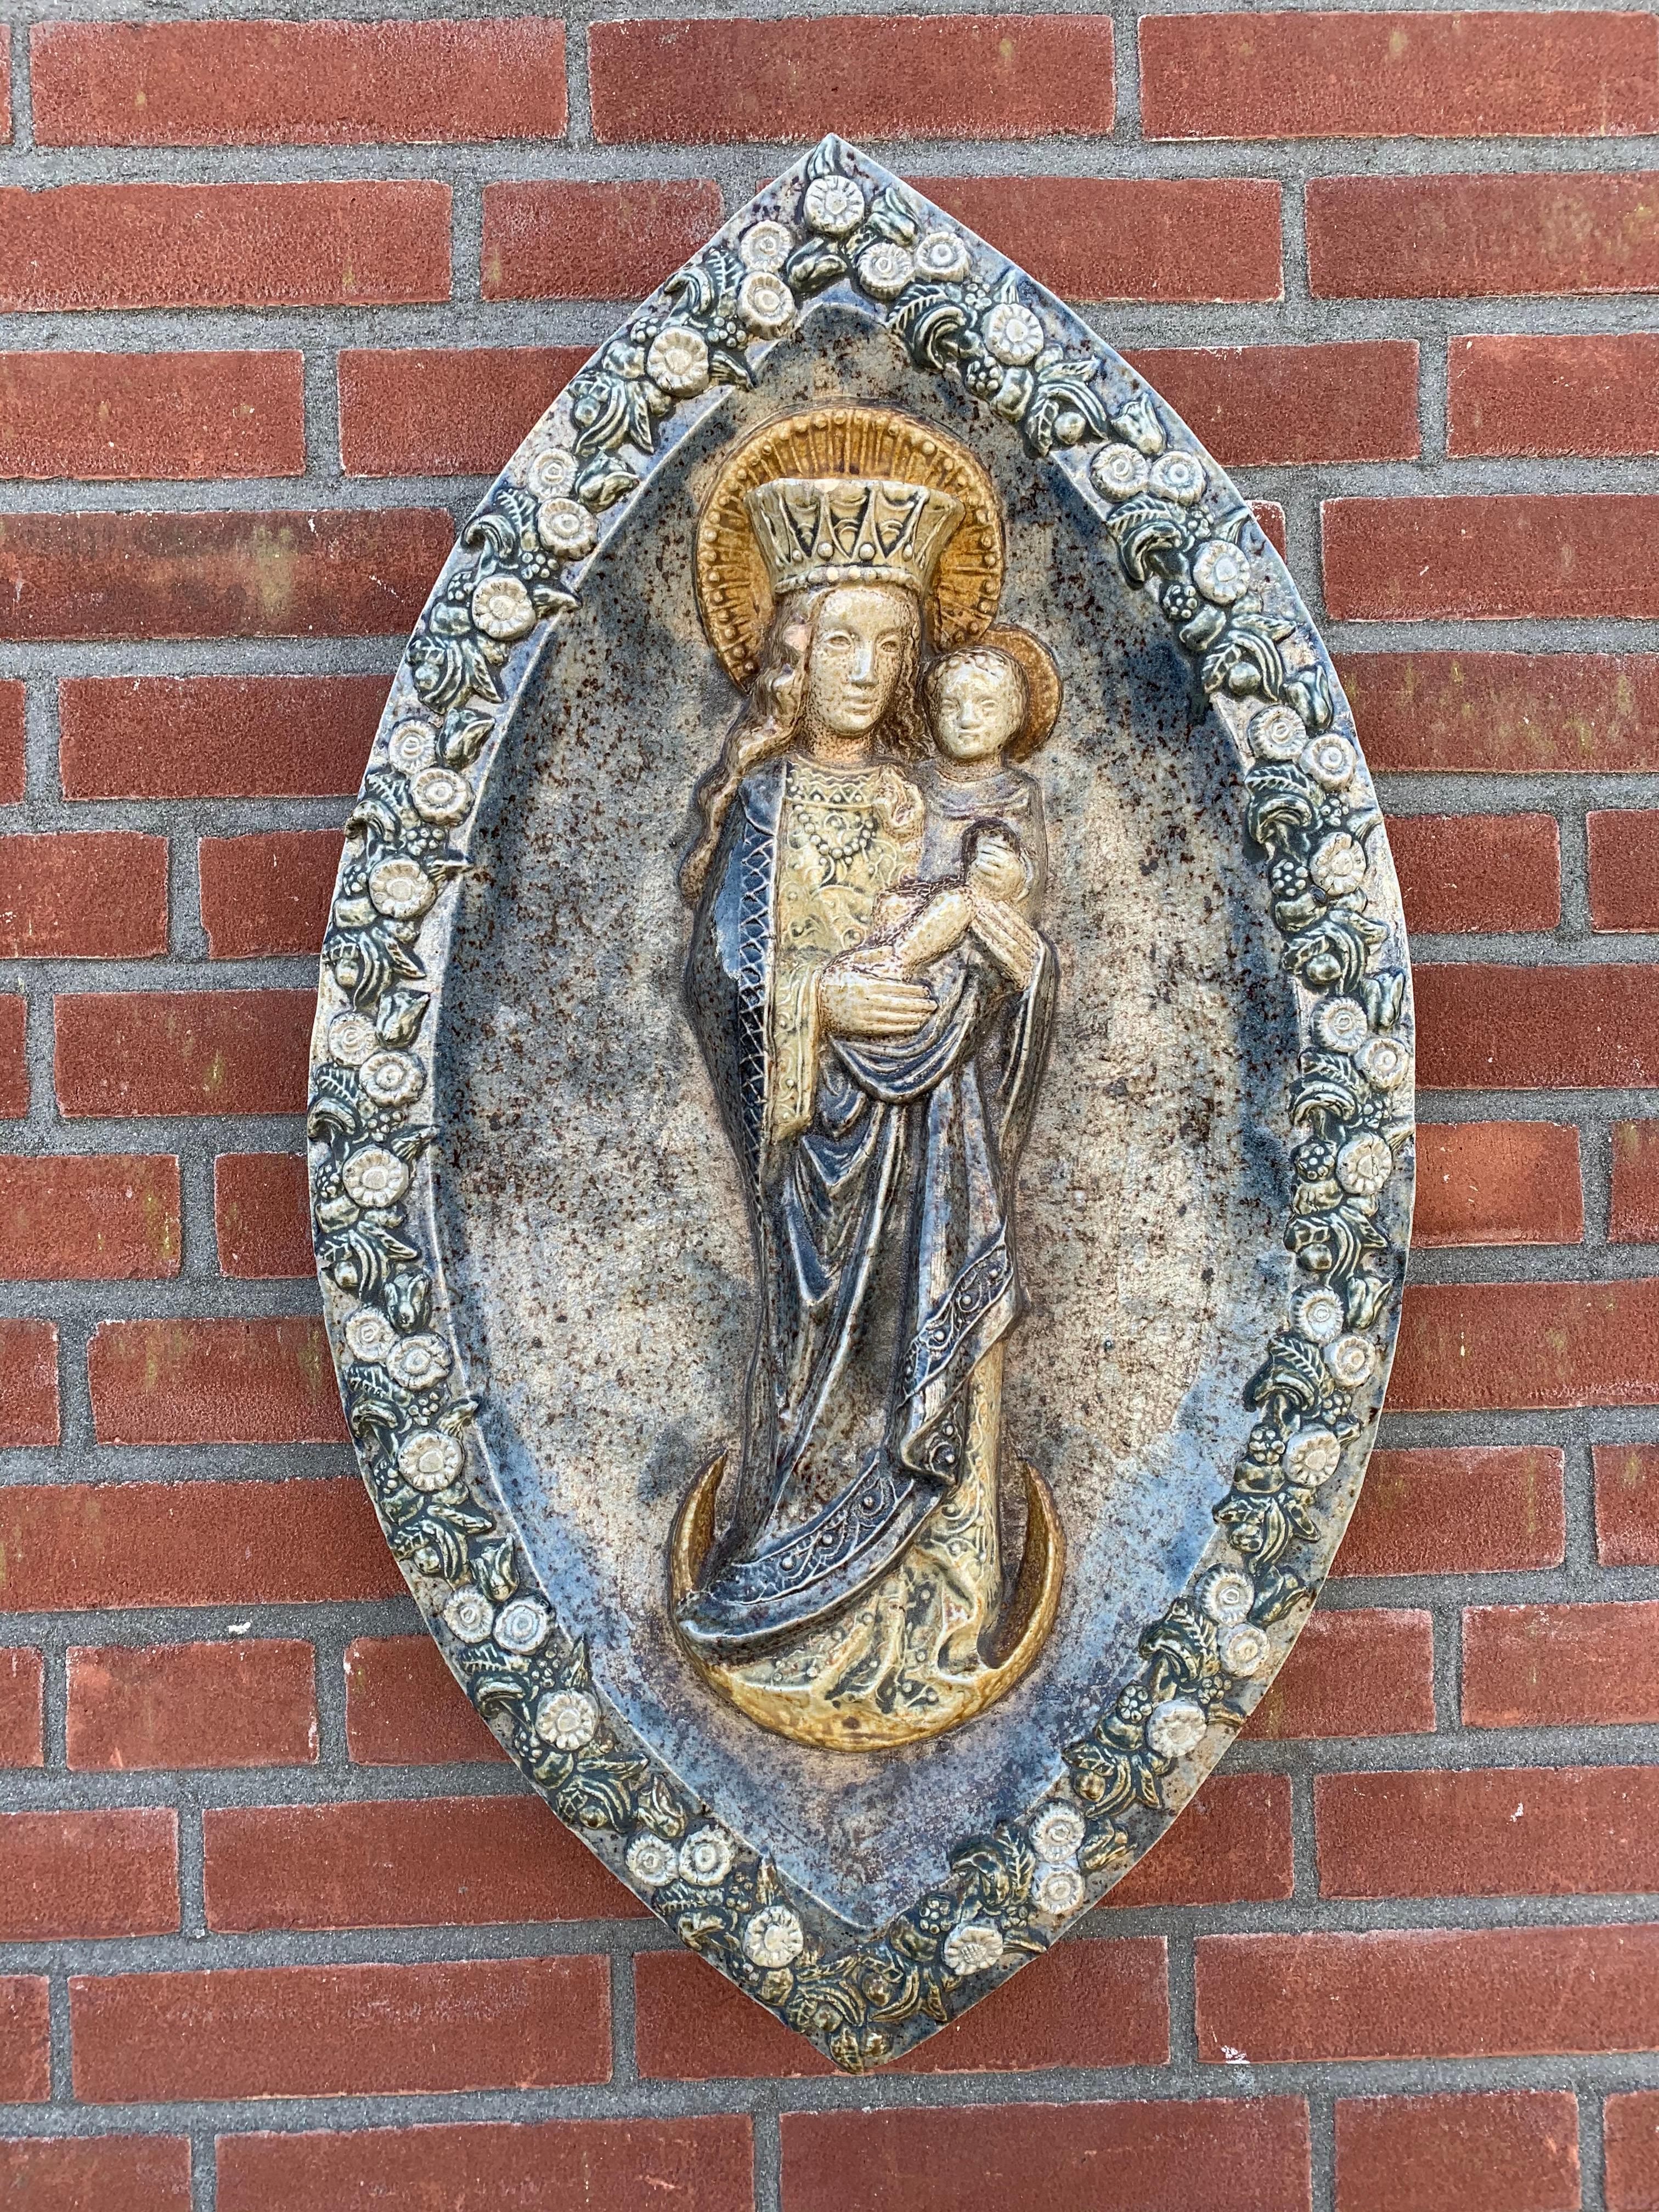 Unique wall plaque depicting Madonna and Child.

Over the past decade or two we have seen and sold many works of religious art, but we never before had the pleasure of offering such a unique and all handcrafted piece out of glazed terracotta. To